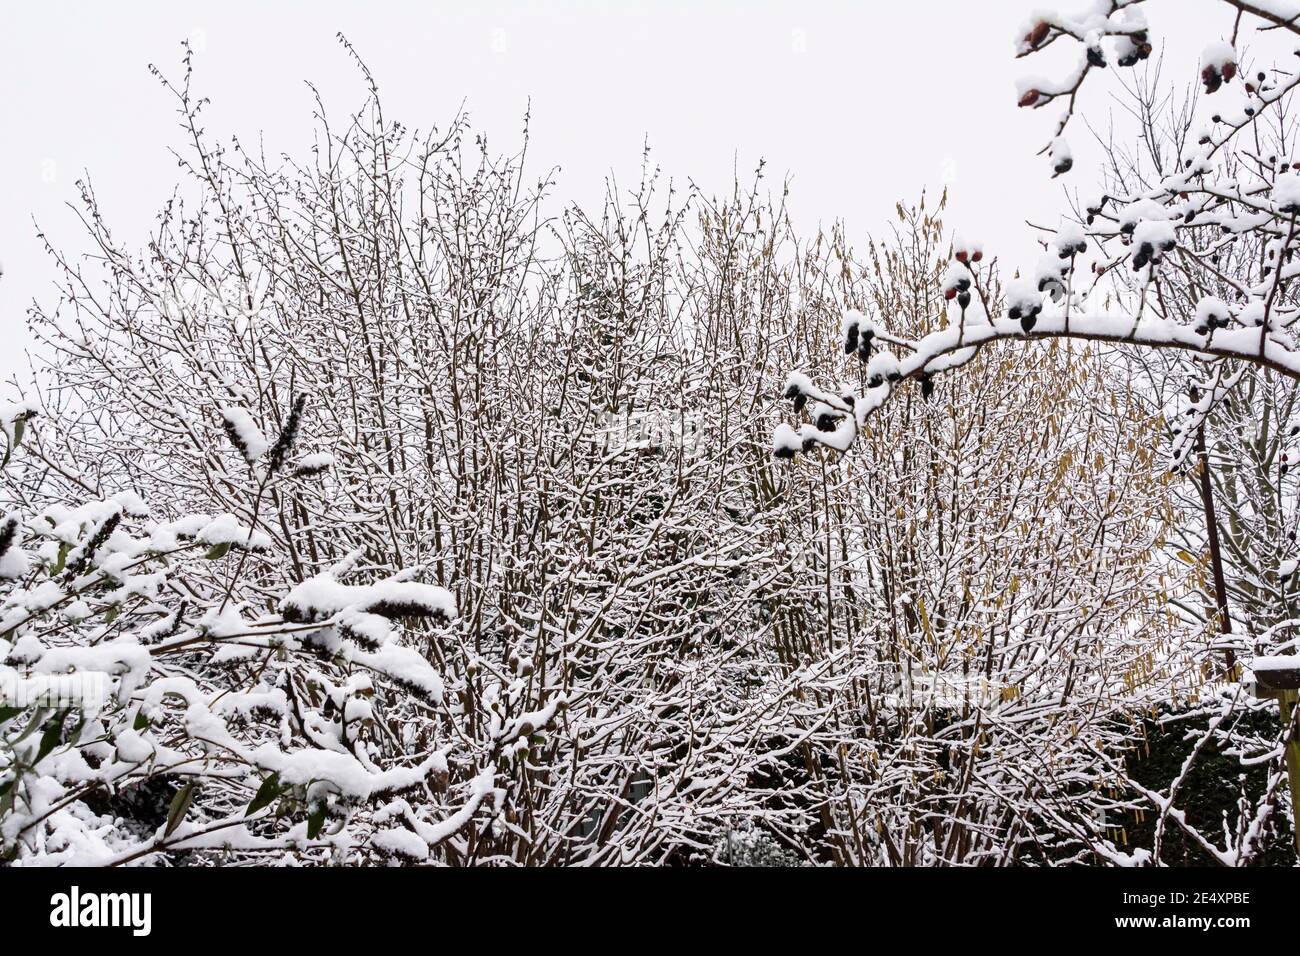 The branches of hazel trees (Corylus avellana), a Buddleja and rosehips covered in snow Stock Photo